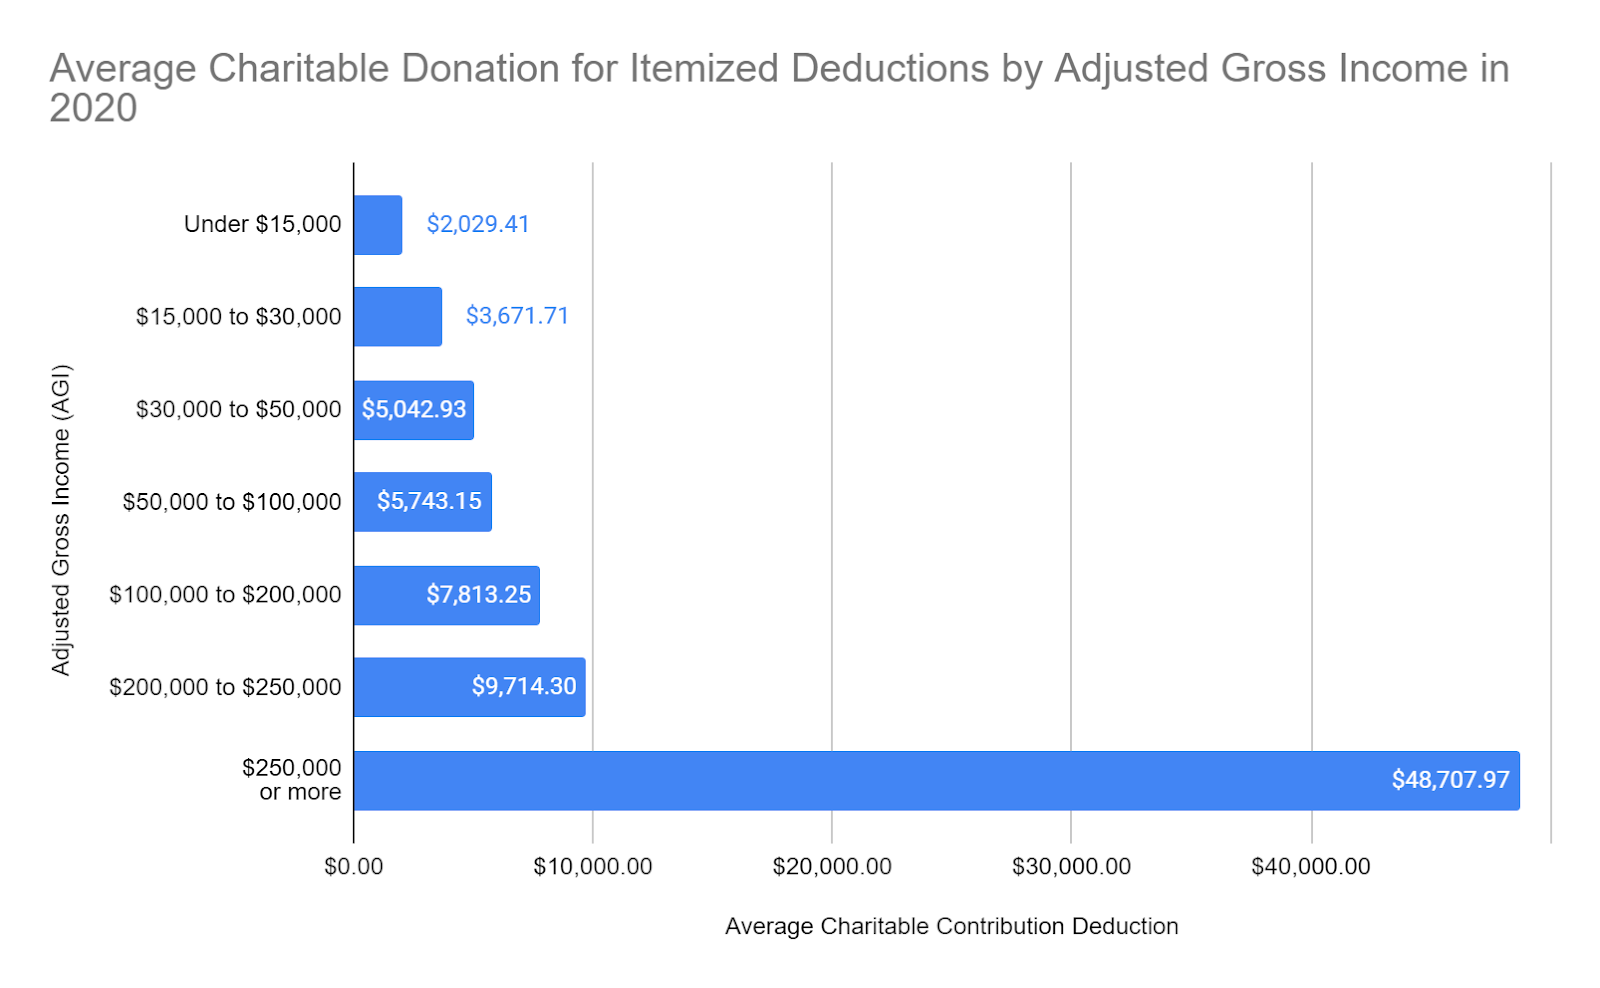 Average charitable donation for itemized deductions by AGI in 2020